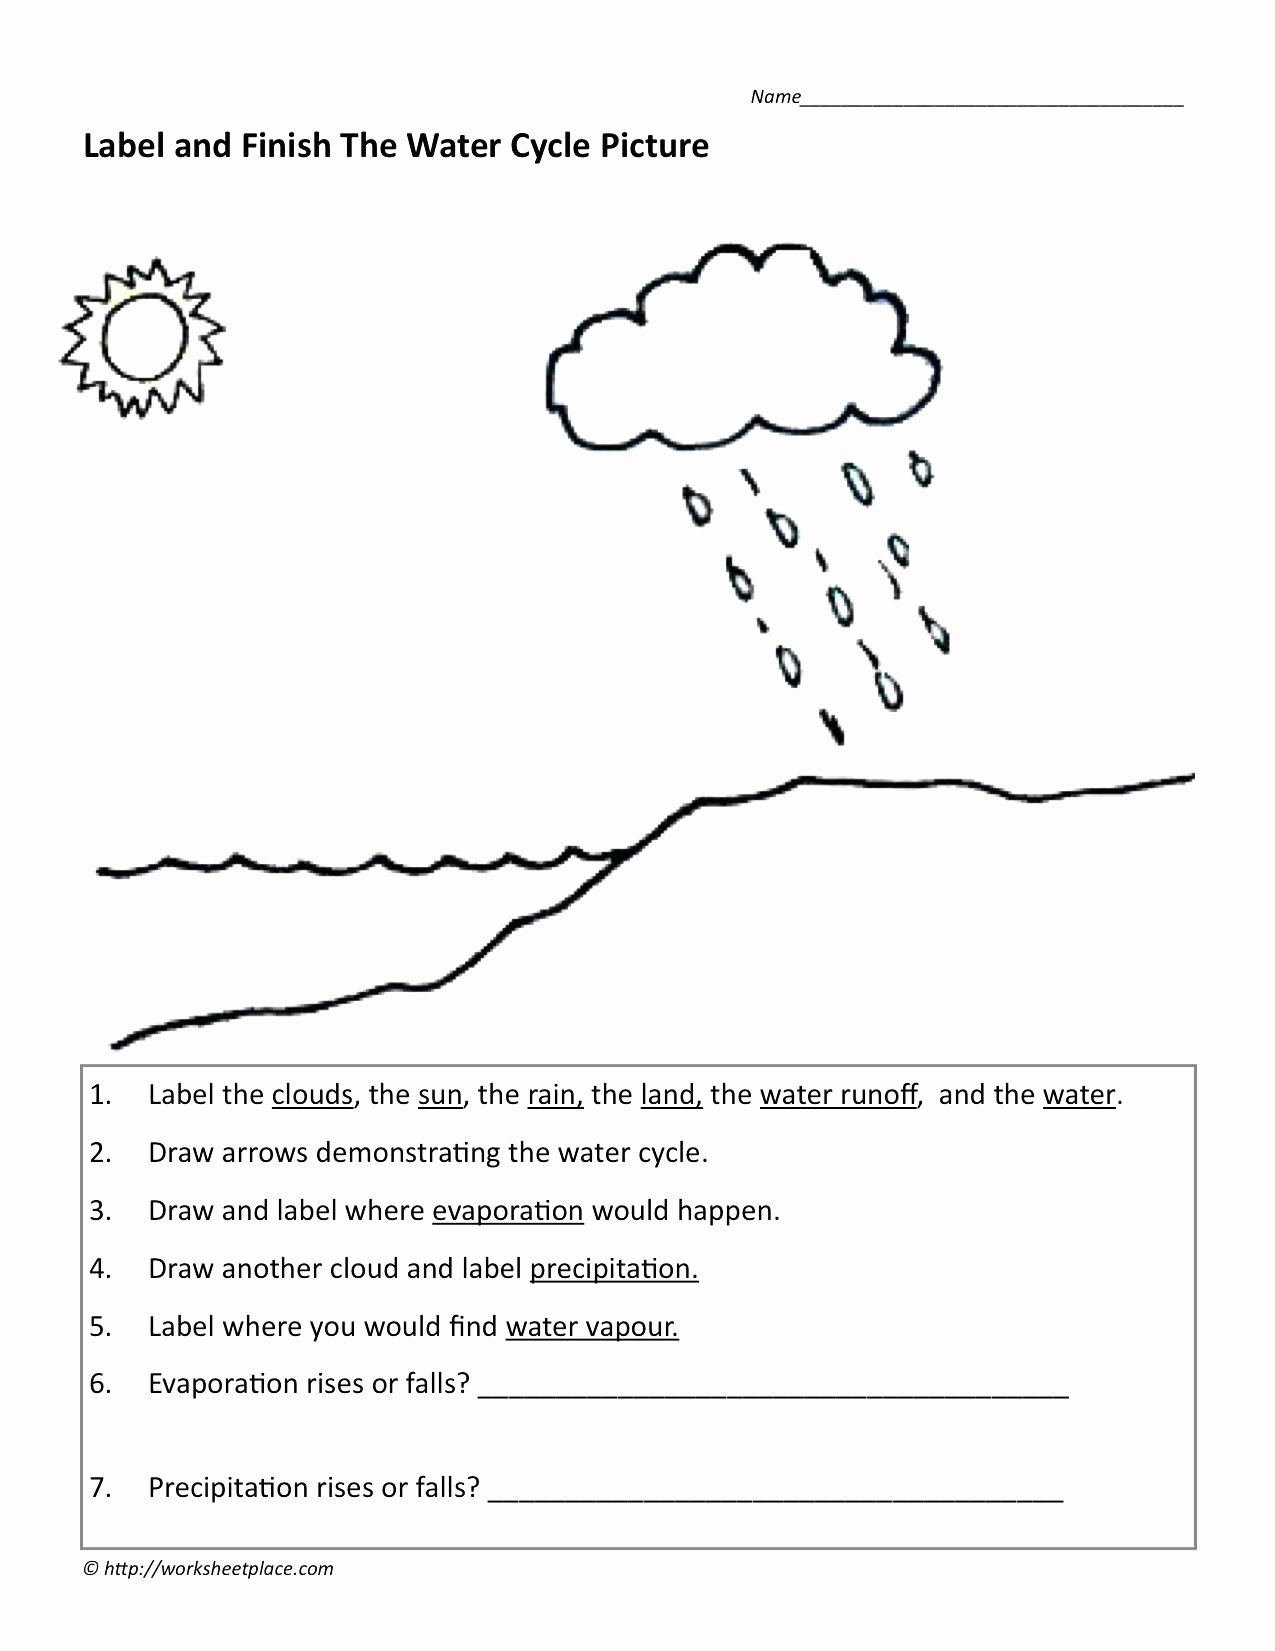 Water Cycle Worksheet Middle School Inspirational Water Carbon and Nitrogen Cycle Worksheet Answers Water